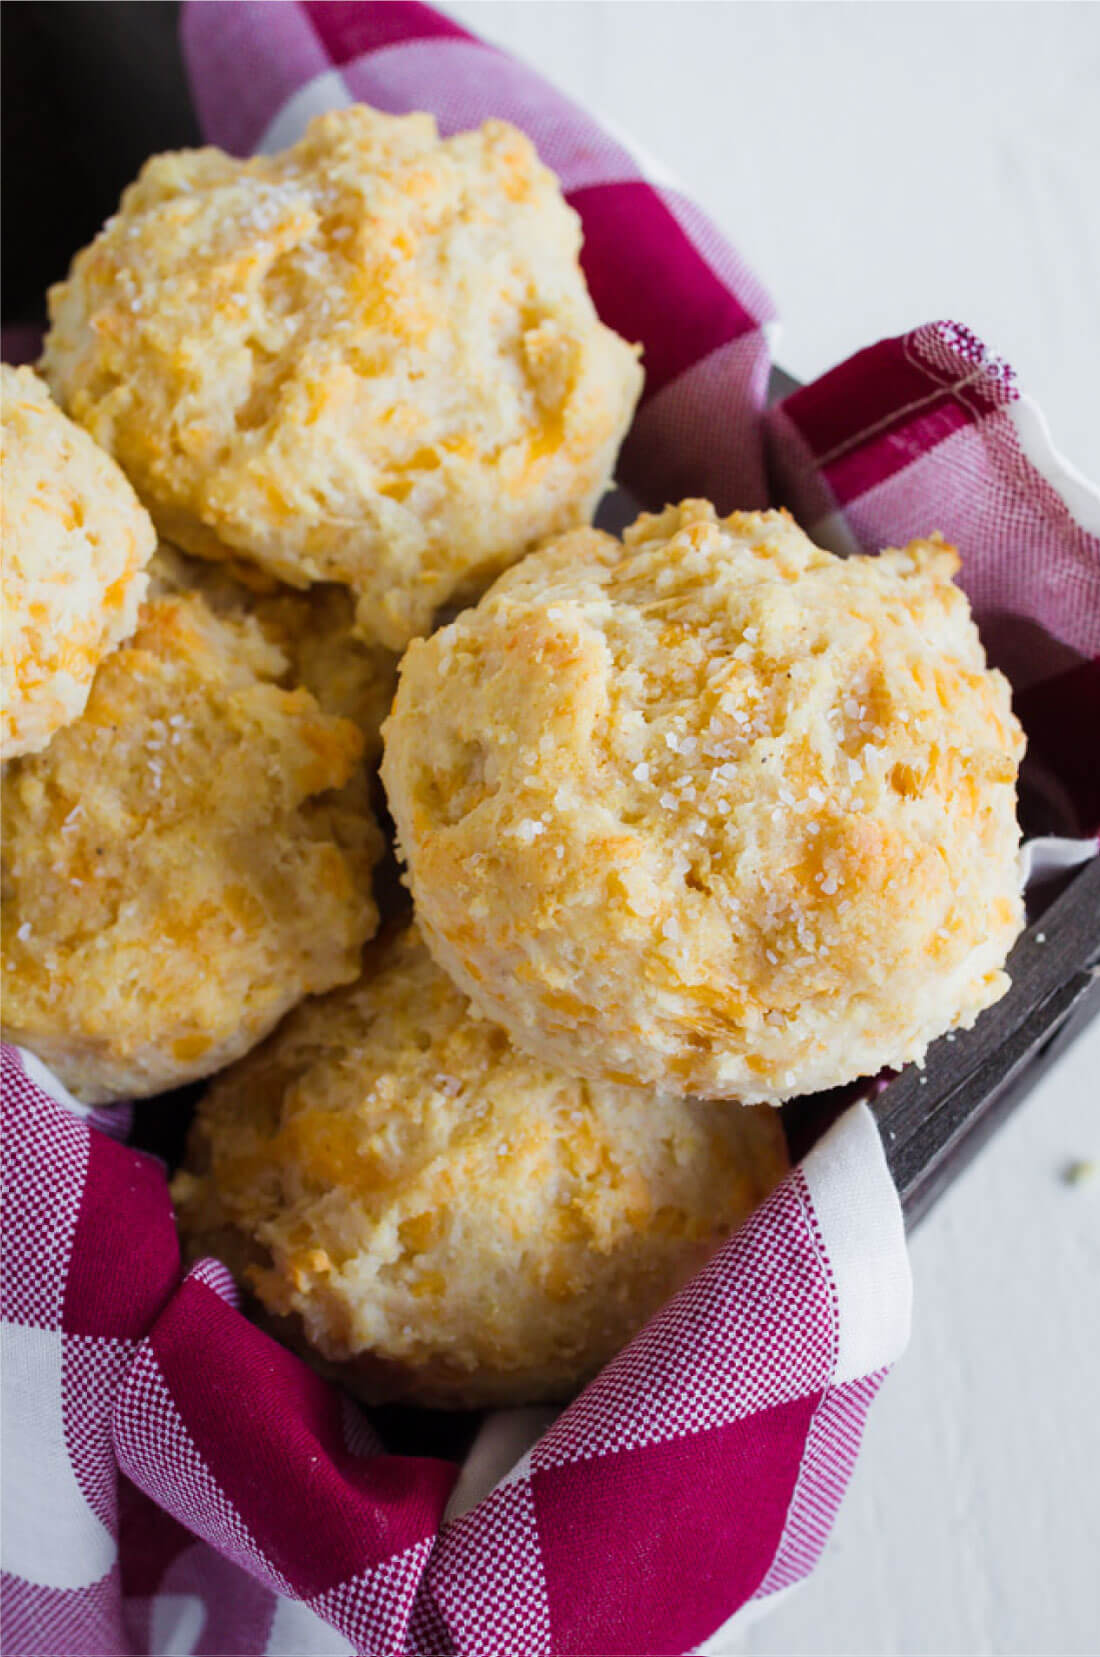 Homemade Biscuits - these melt in your mouth cheddar biscuits are not only easy to make but soooo good! www.thirtyhandmadedays.com